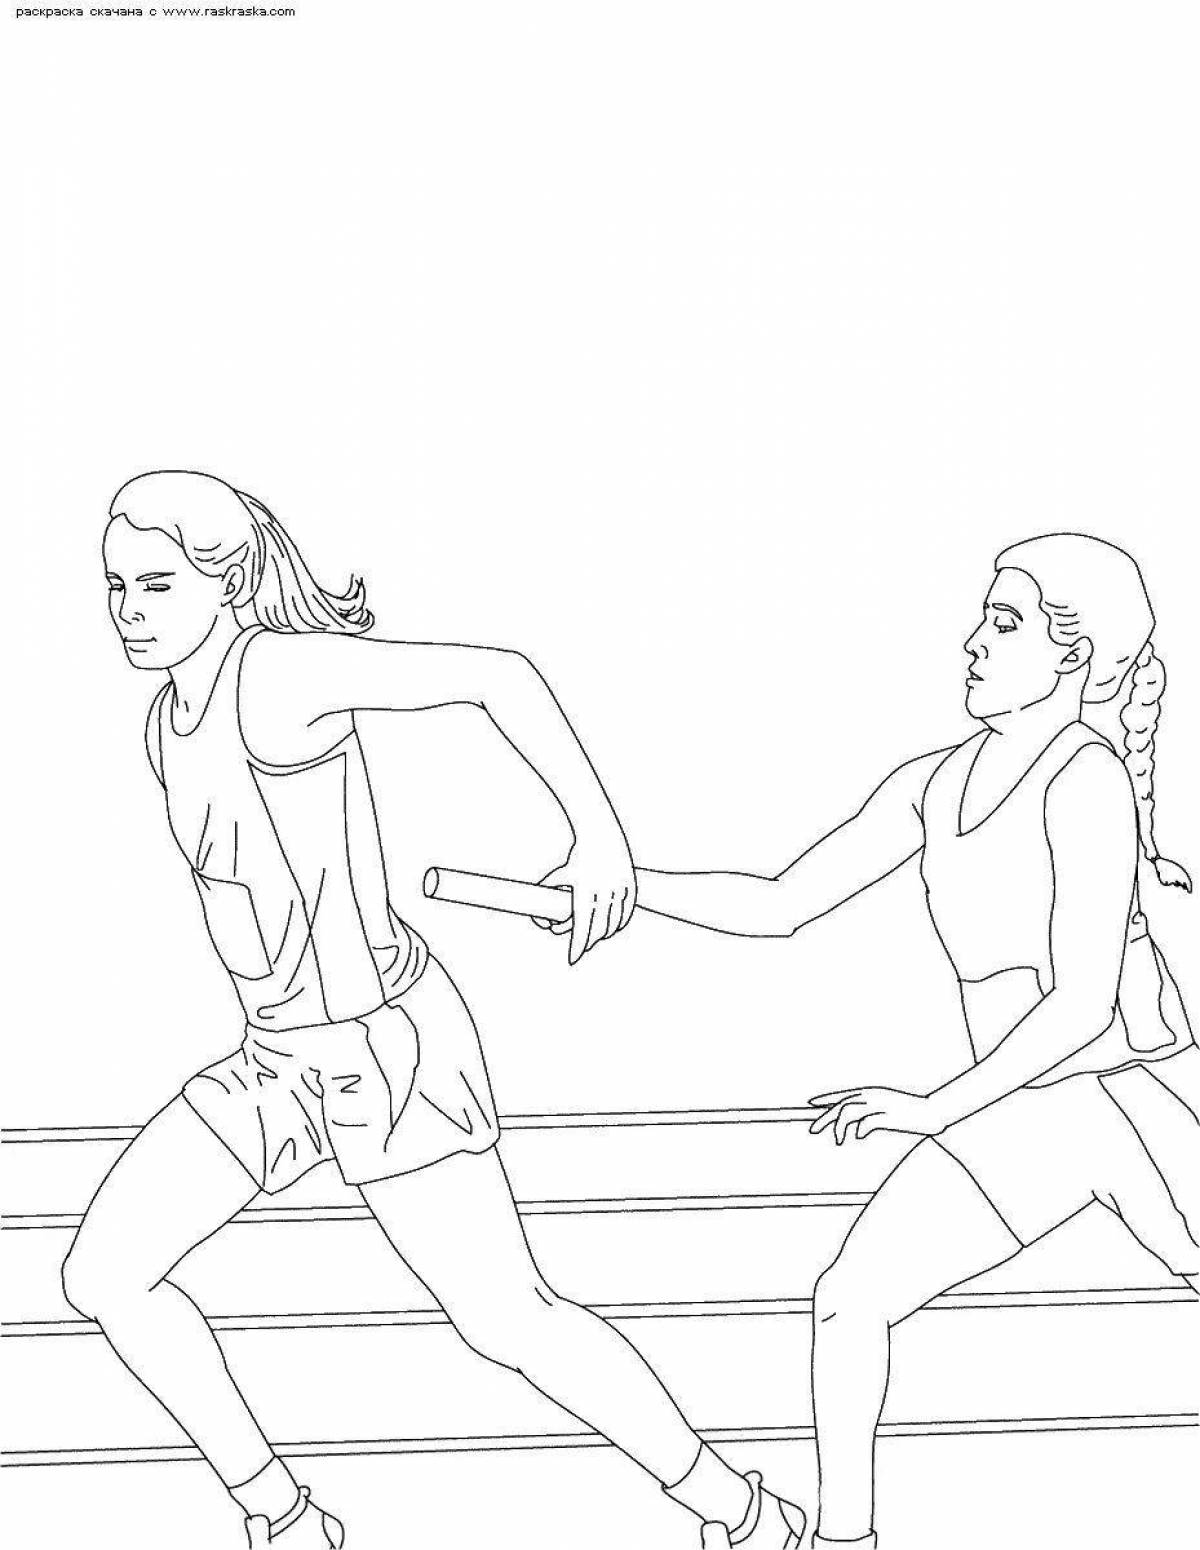 Stimulated athletics coloring page